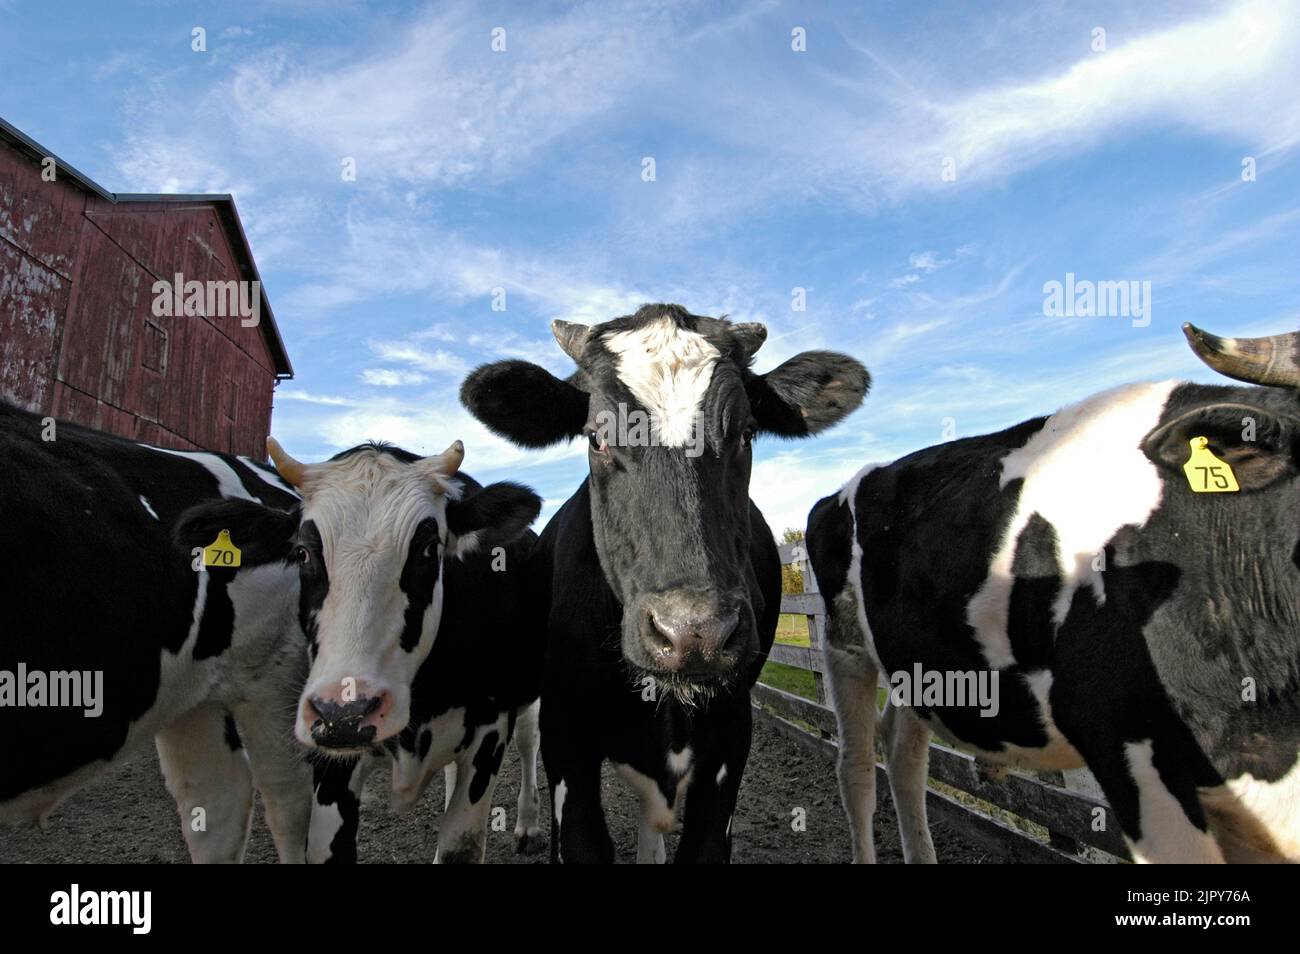 close up of Dairy cow with numbered ear tag on Amish Farm in Ohio Stock Photo